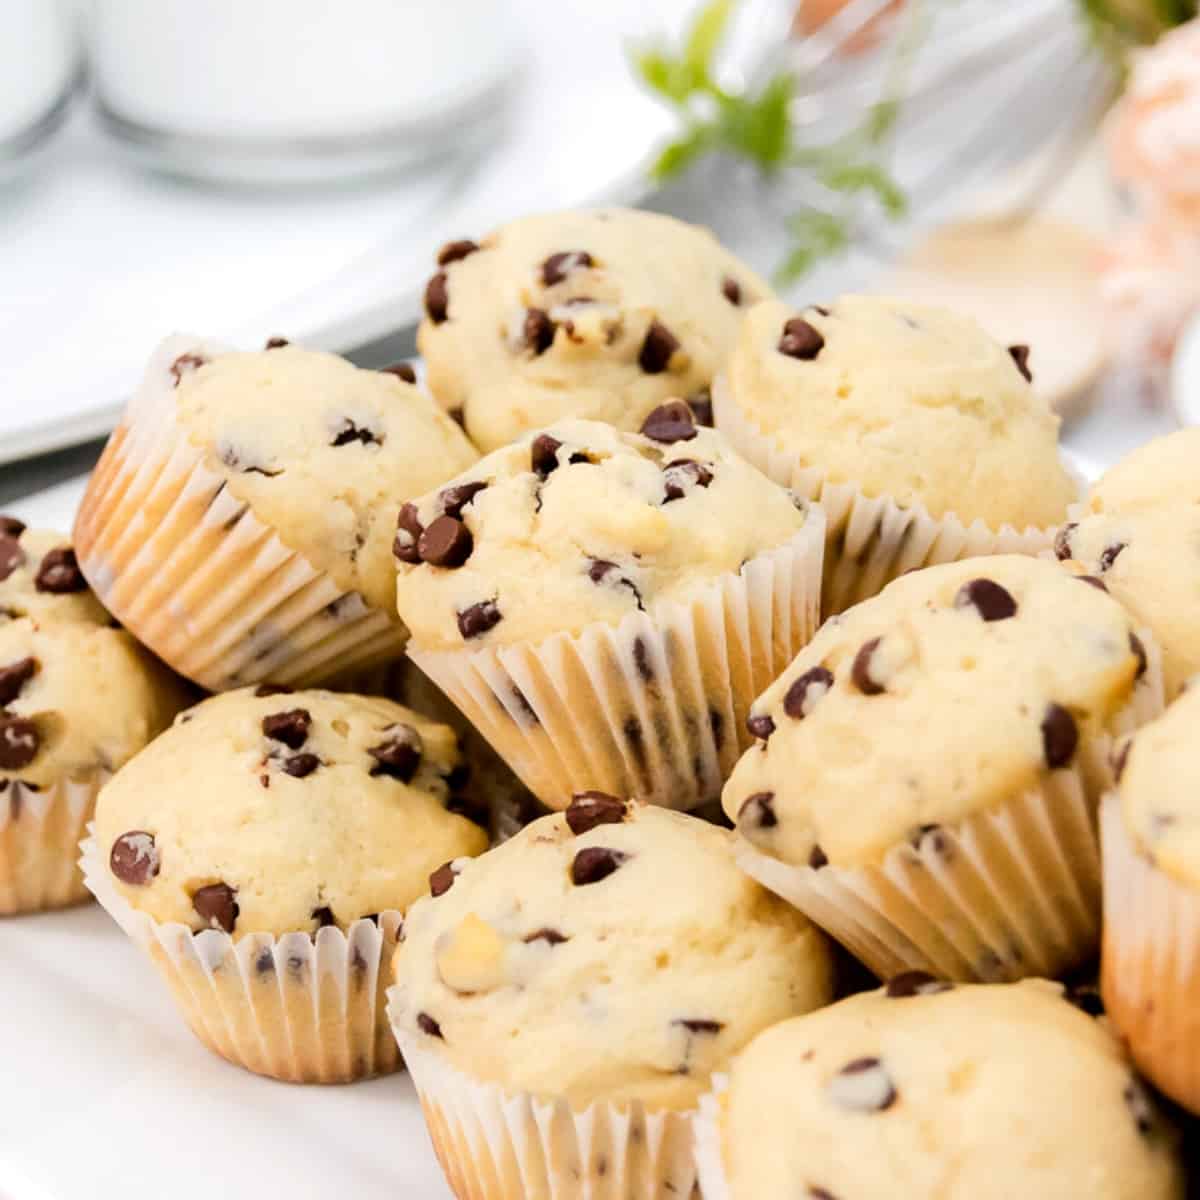 Featured image of mini muffins close up on a white platter.